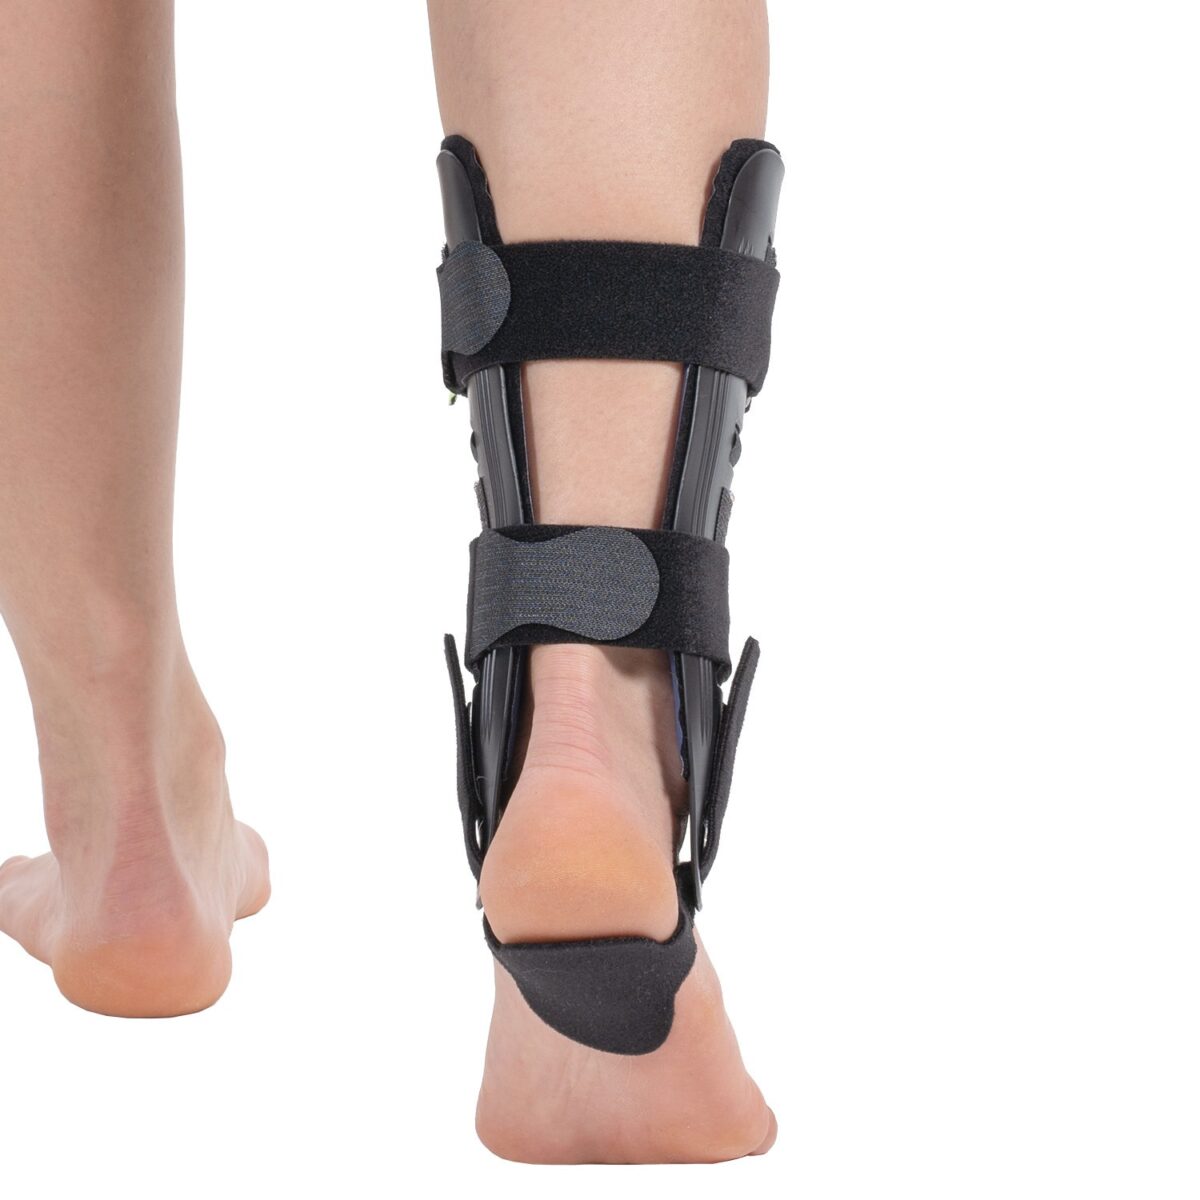 wingmed orthopedic equipments W616 ankle brace with gel pad 39 1 1